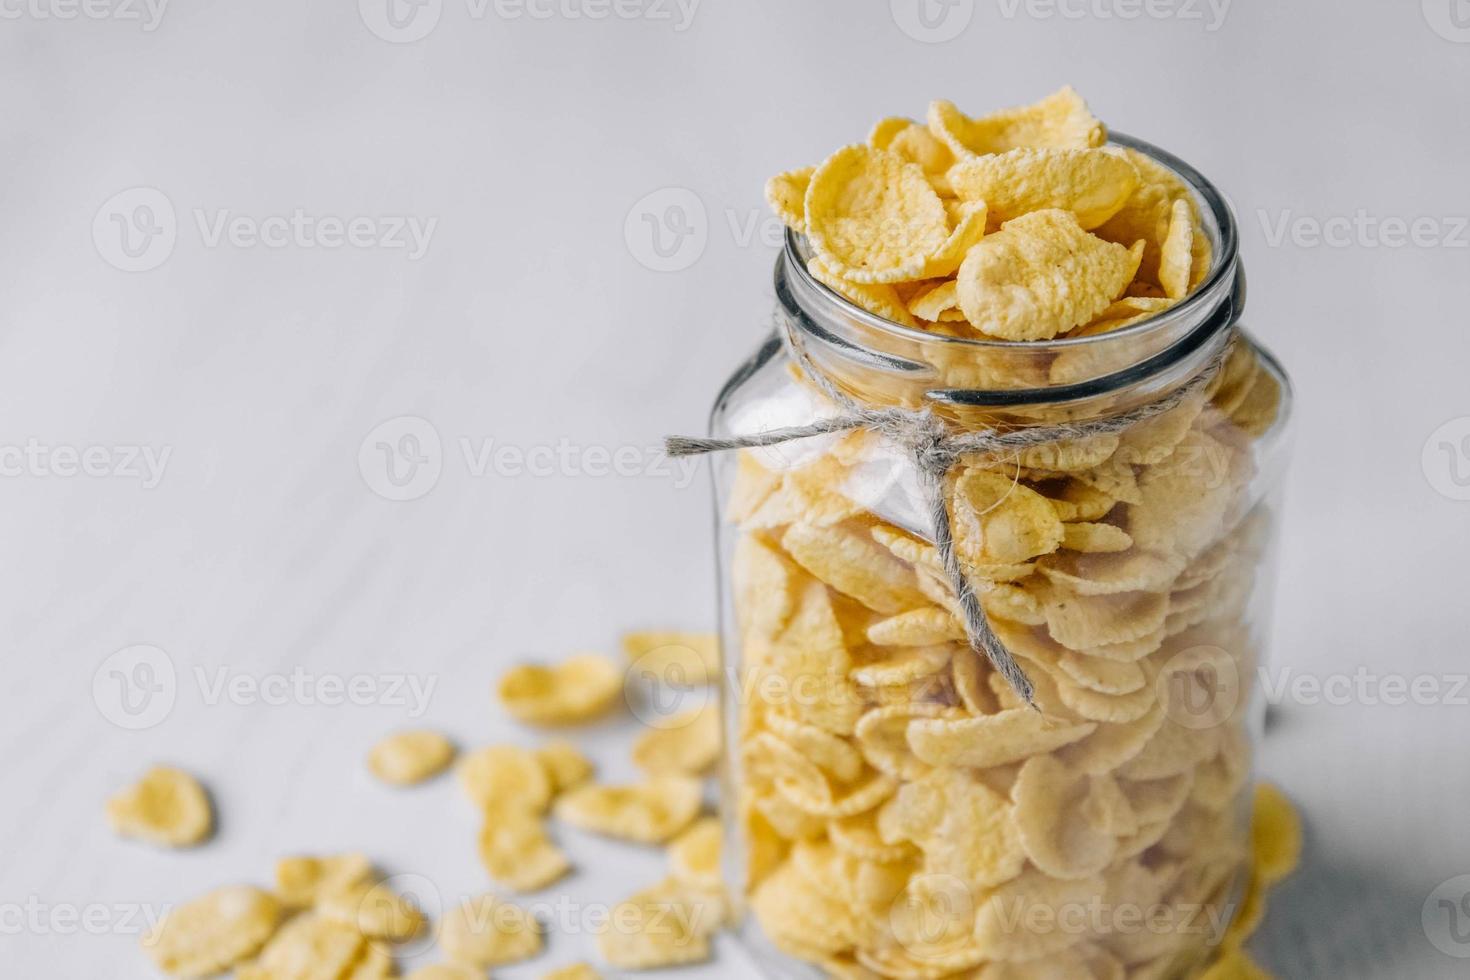 Corn flakes in a glass jar on white wooden surface photo